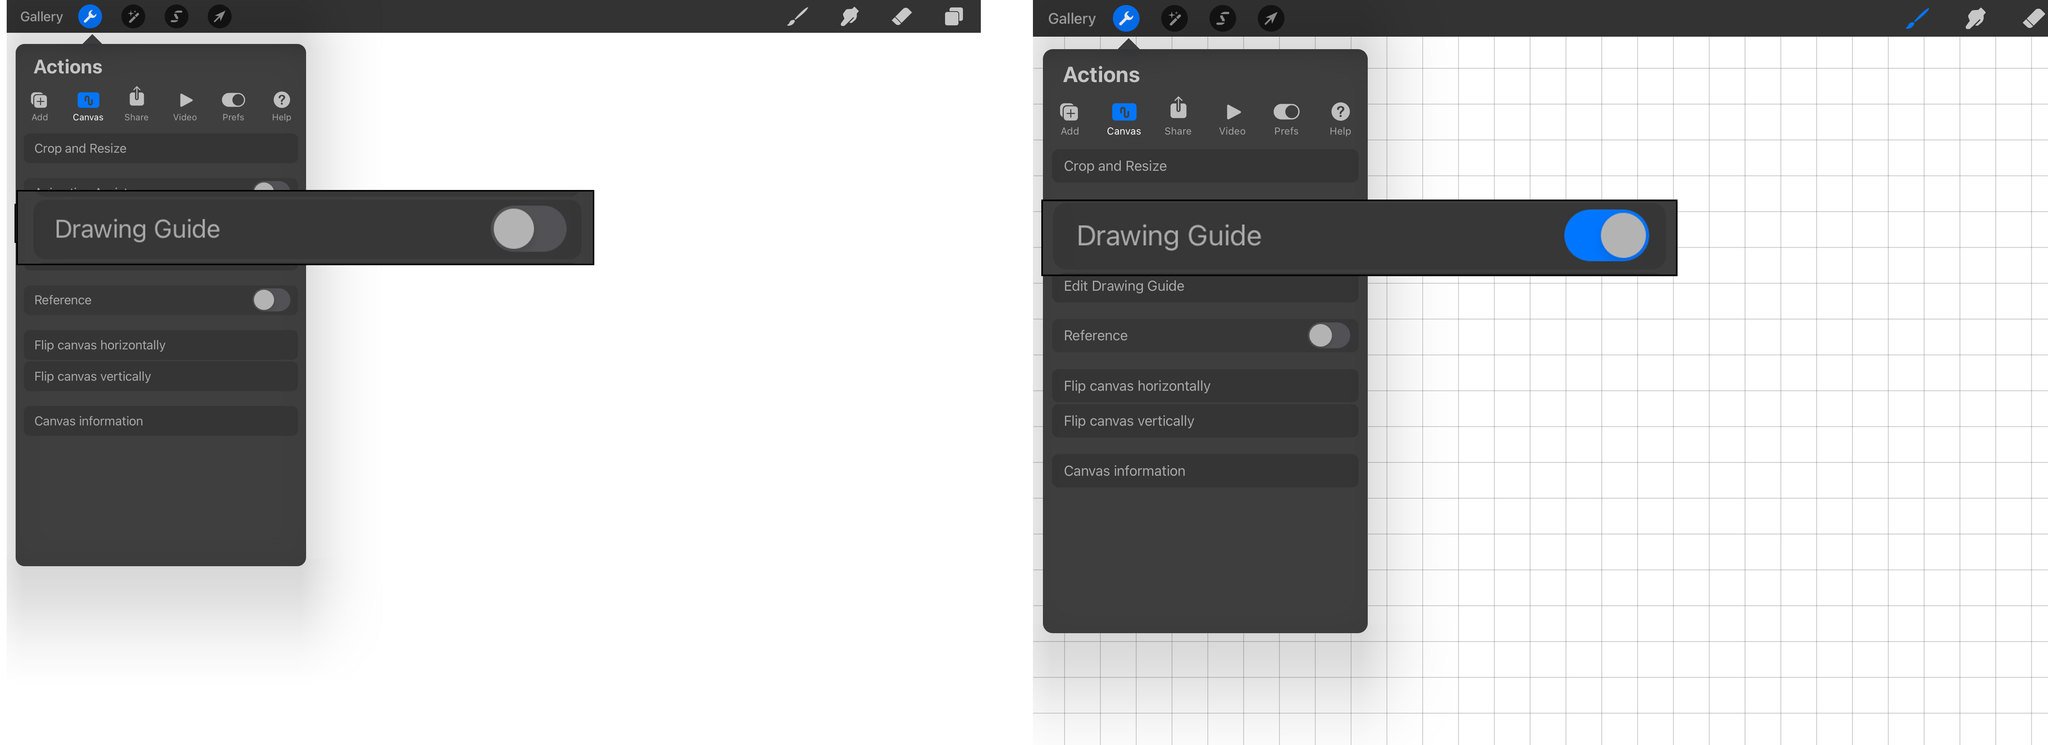 To add a Drawing Guide, tap on the Canvas button under the Actions menu, and then tap on the Drawing Guide toggle button.